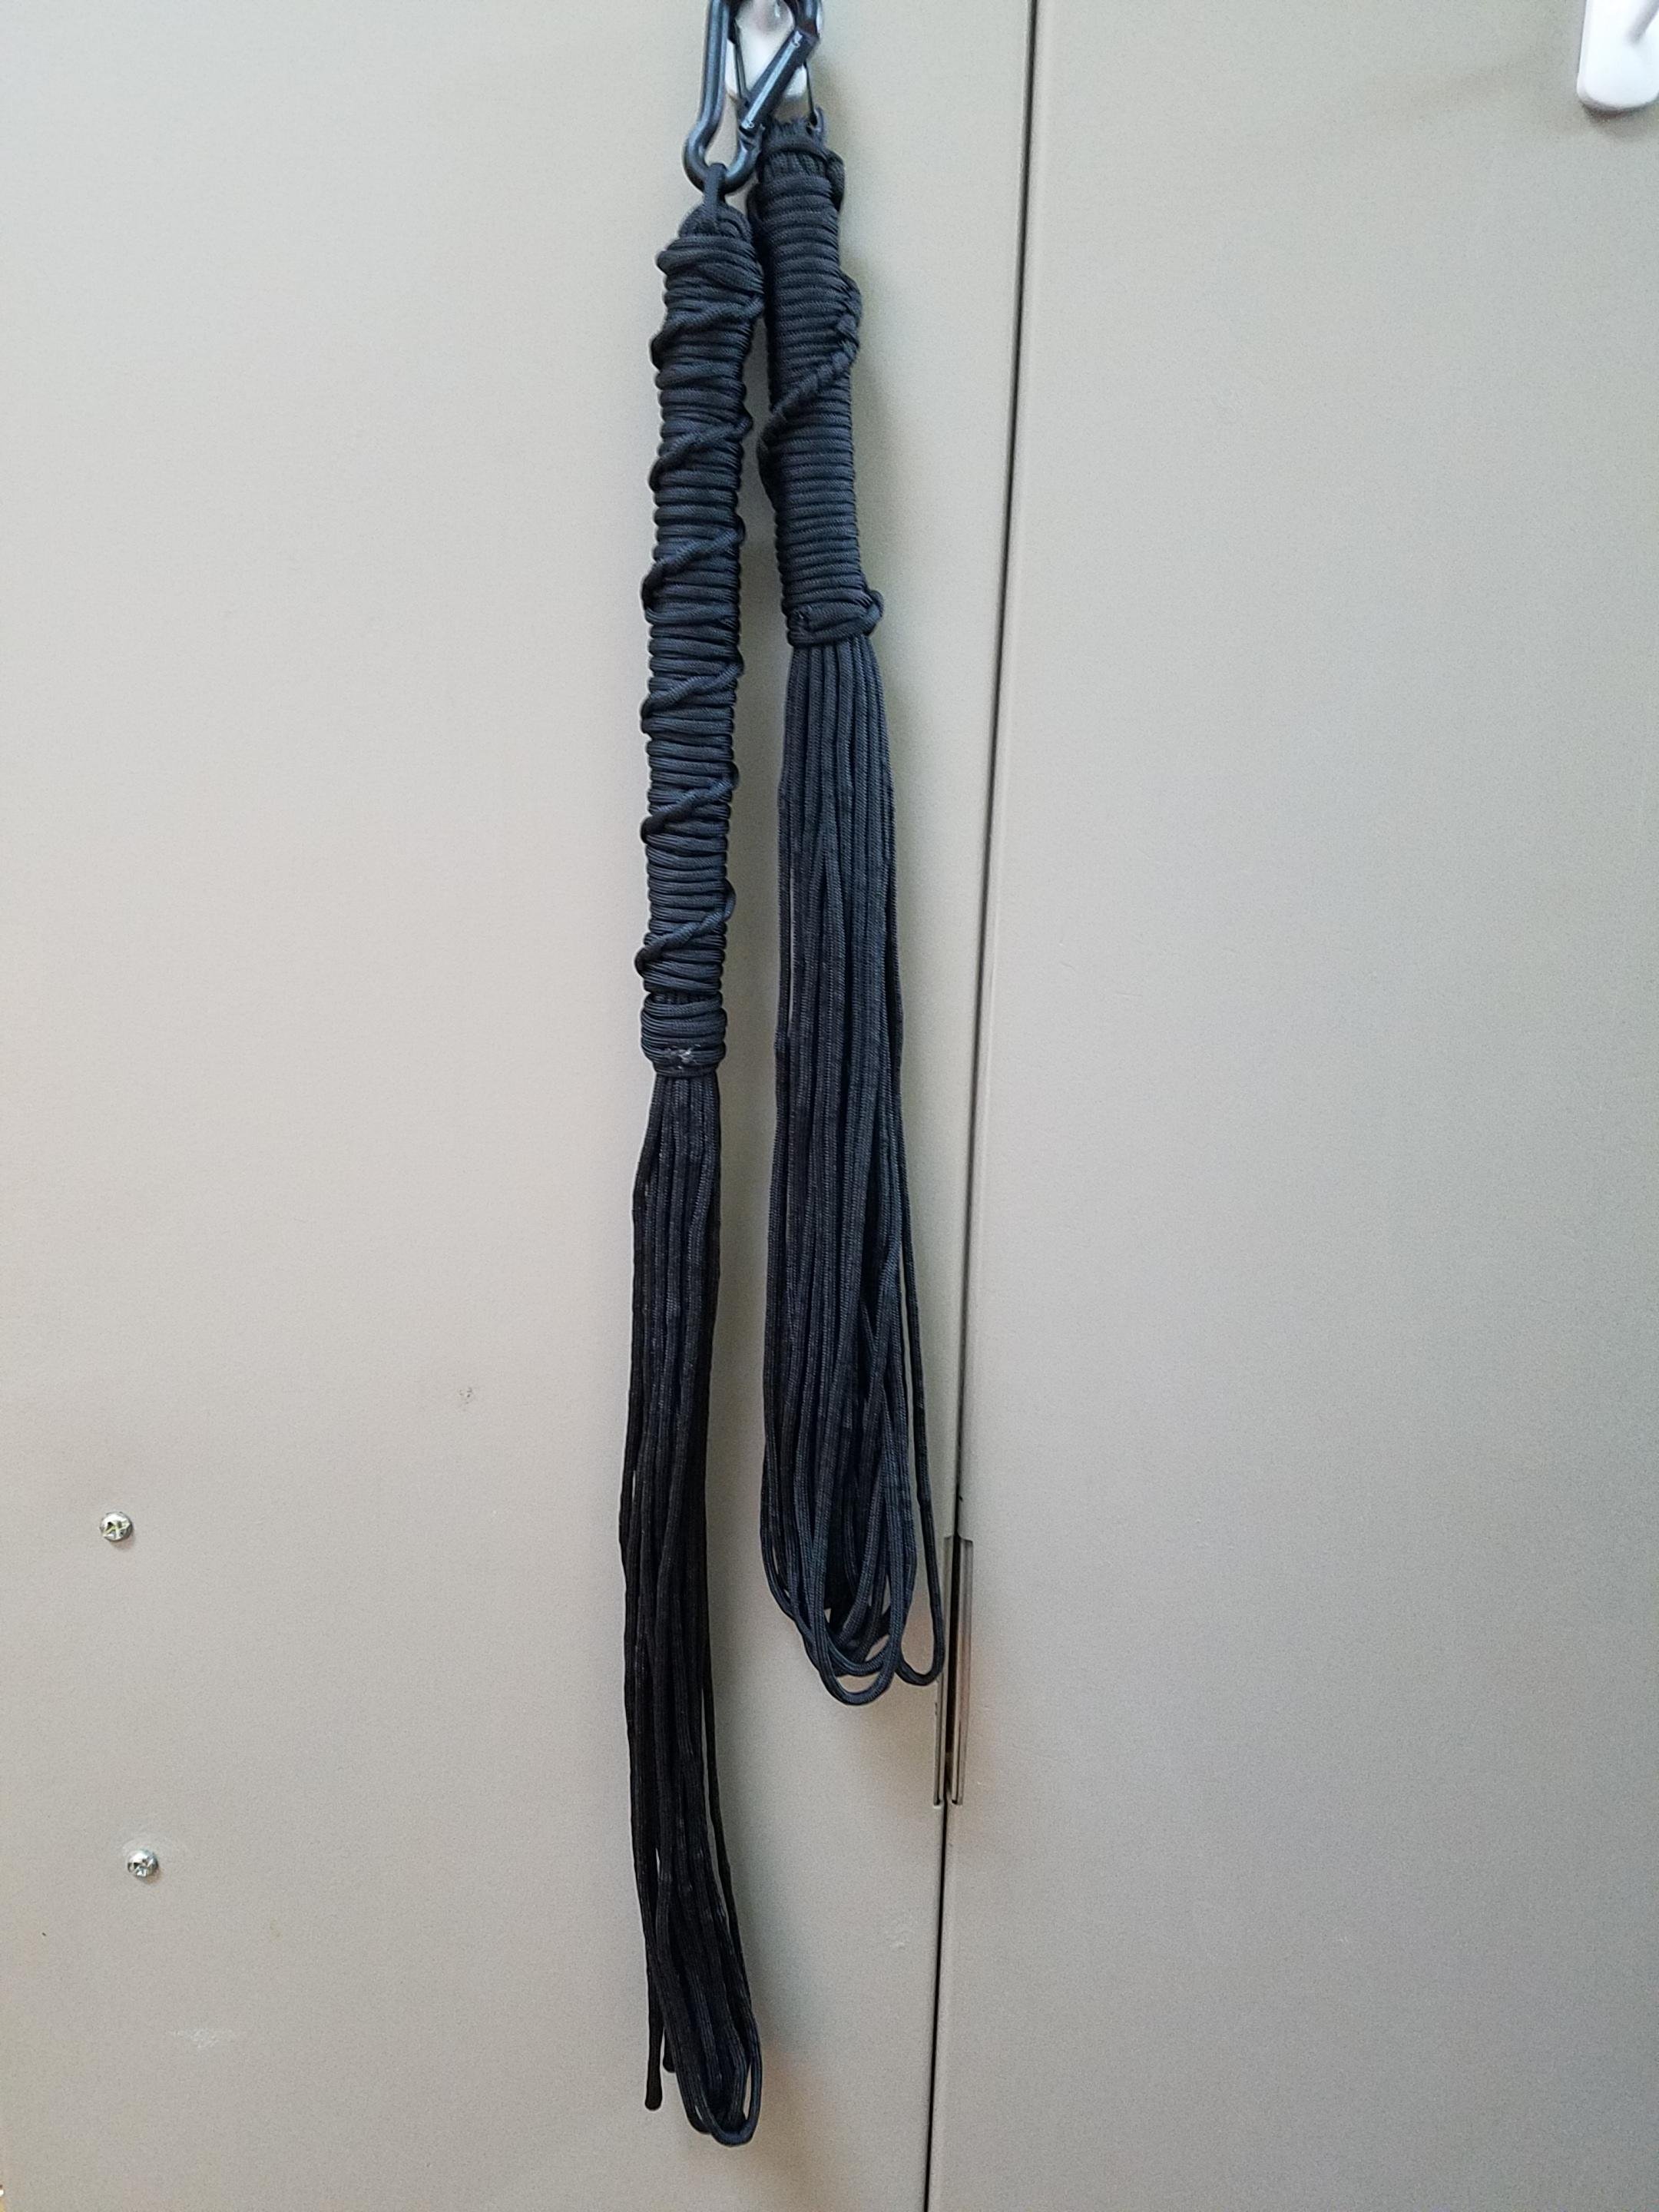 What to do when bored? Make a paracord flogger....